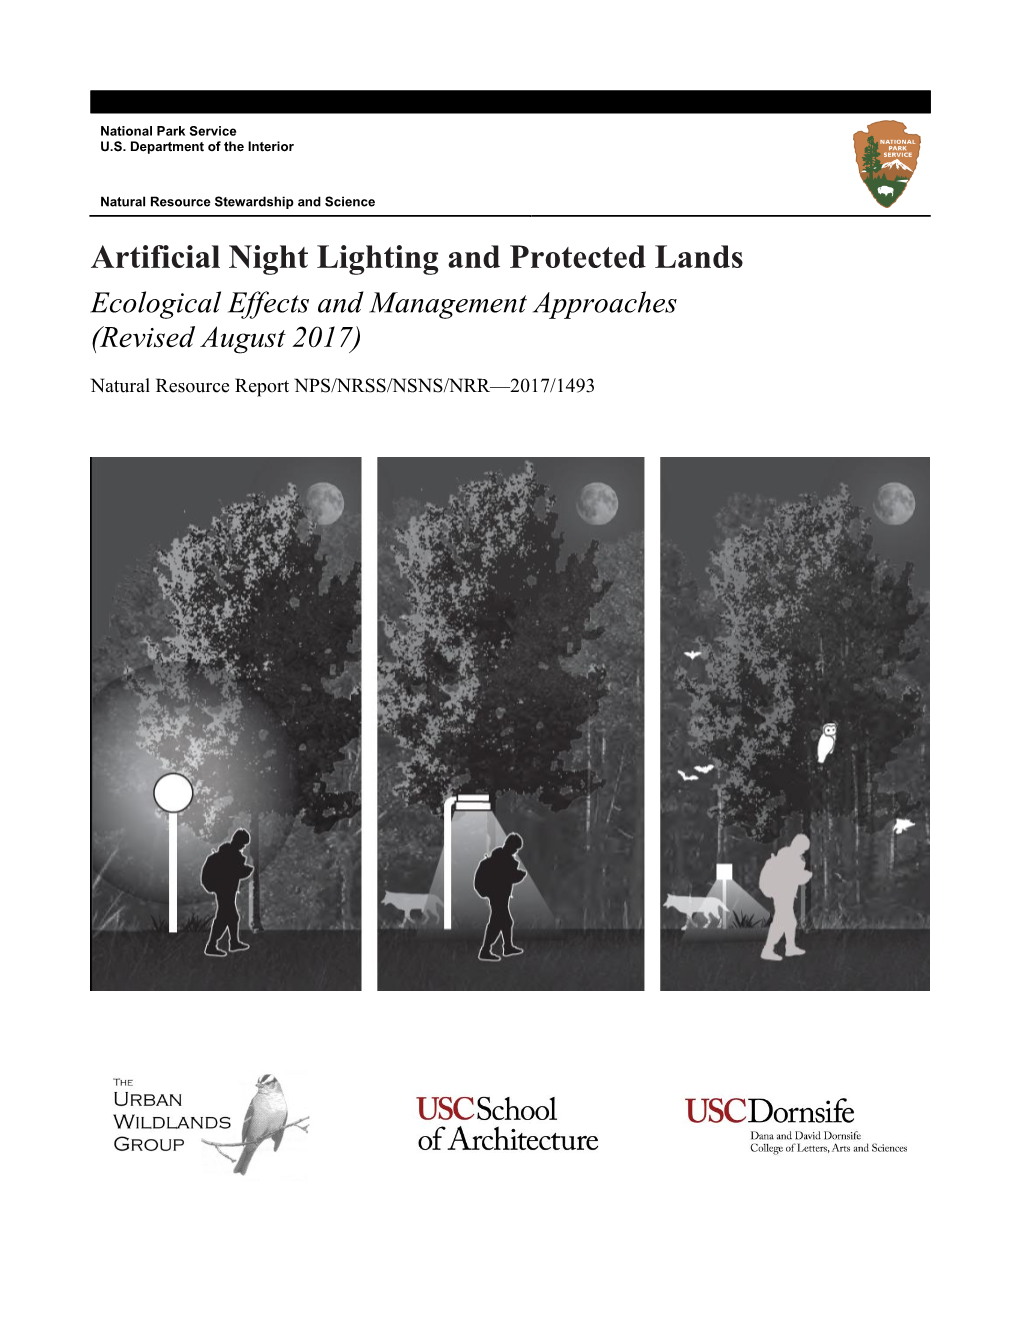 Artificial Night Lighting and Protected Lands Ecological Effects and Management Approaches (Revised August 2017)